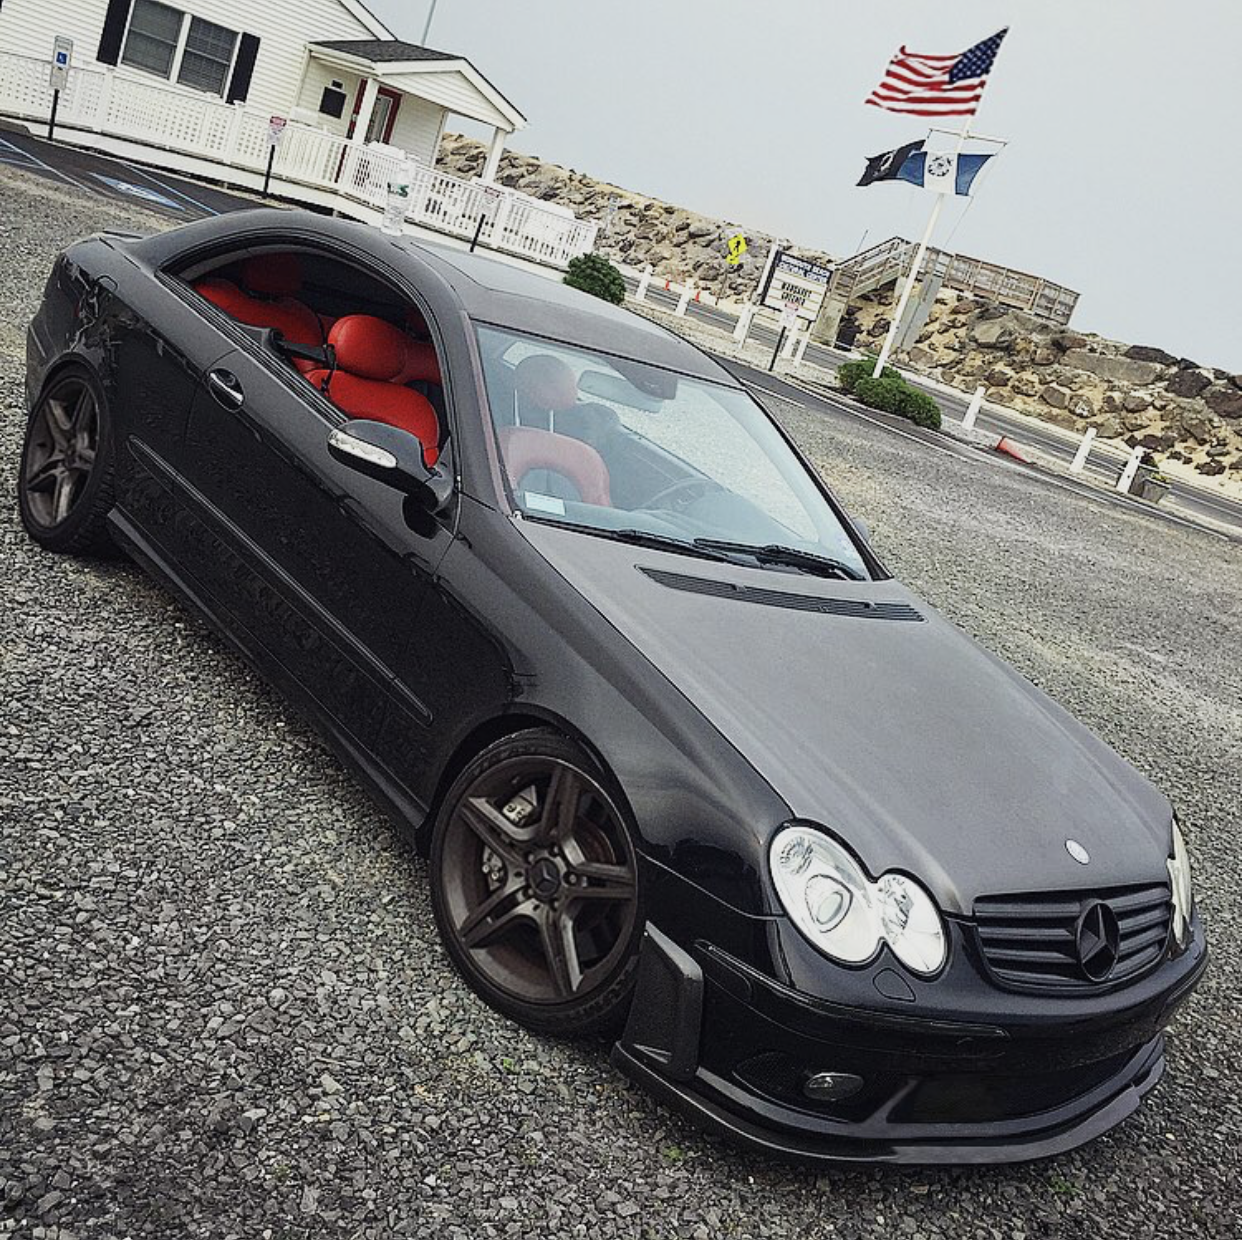 03 Clk 500 With Red Interior Mbworld Org Forums